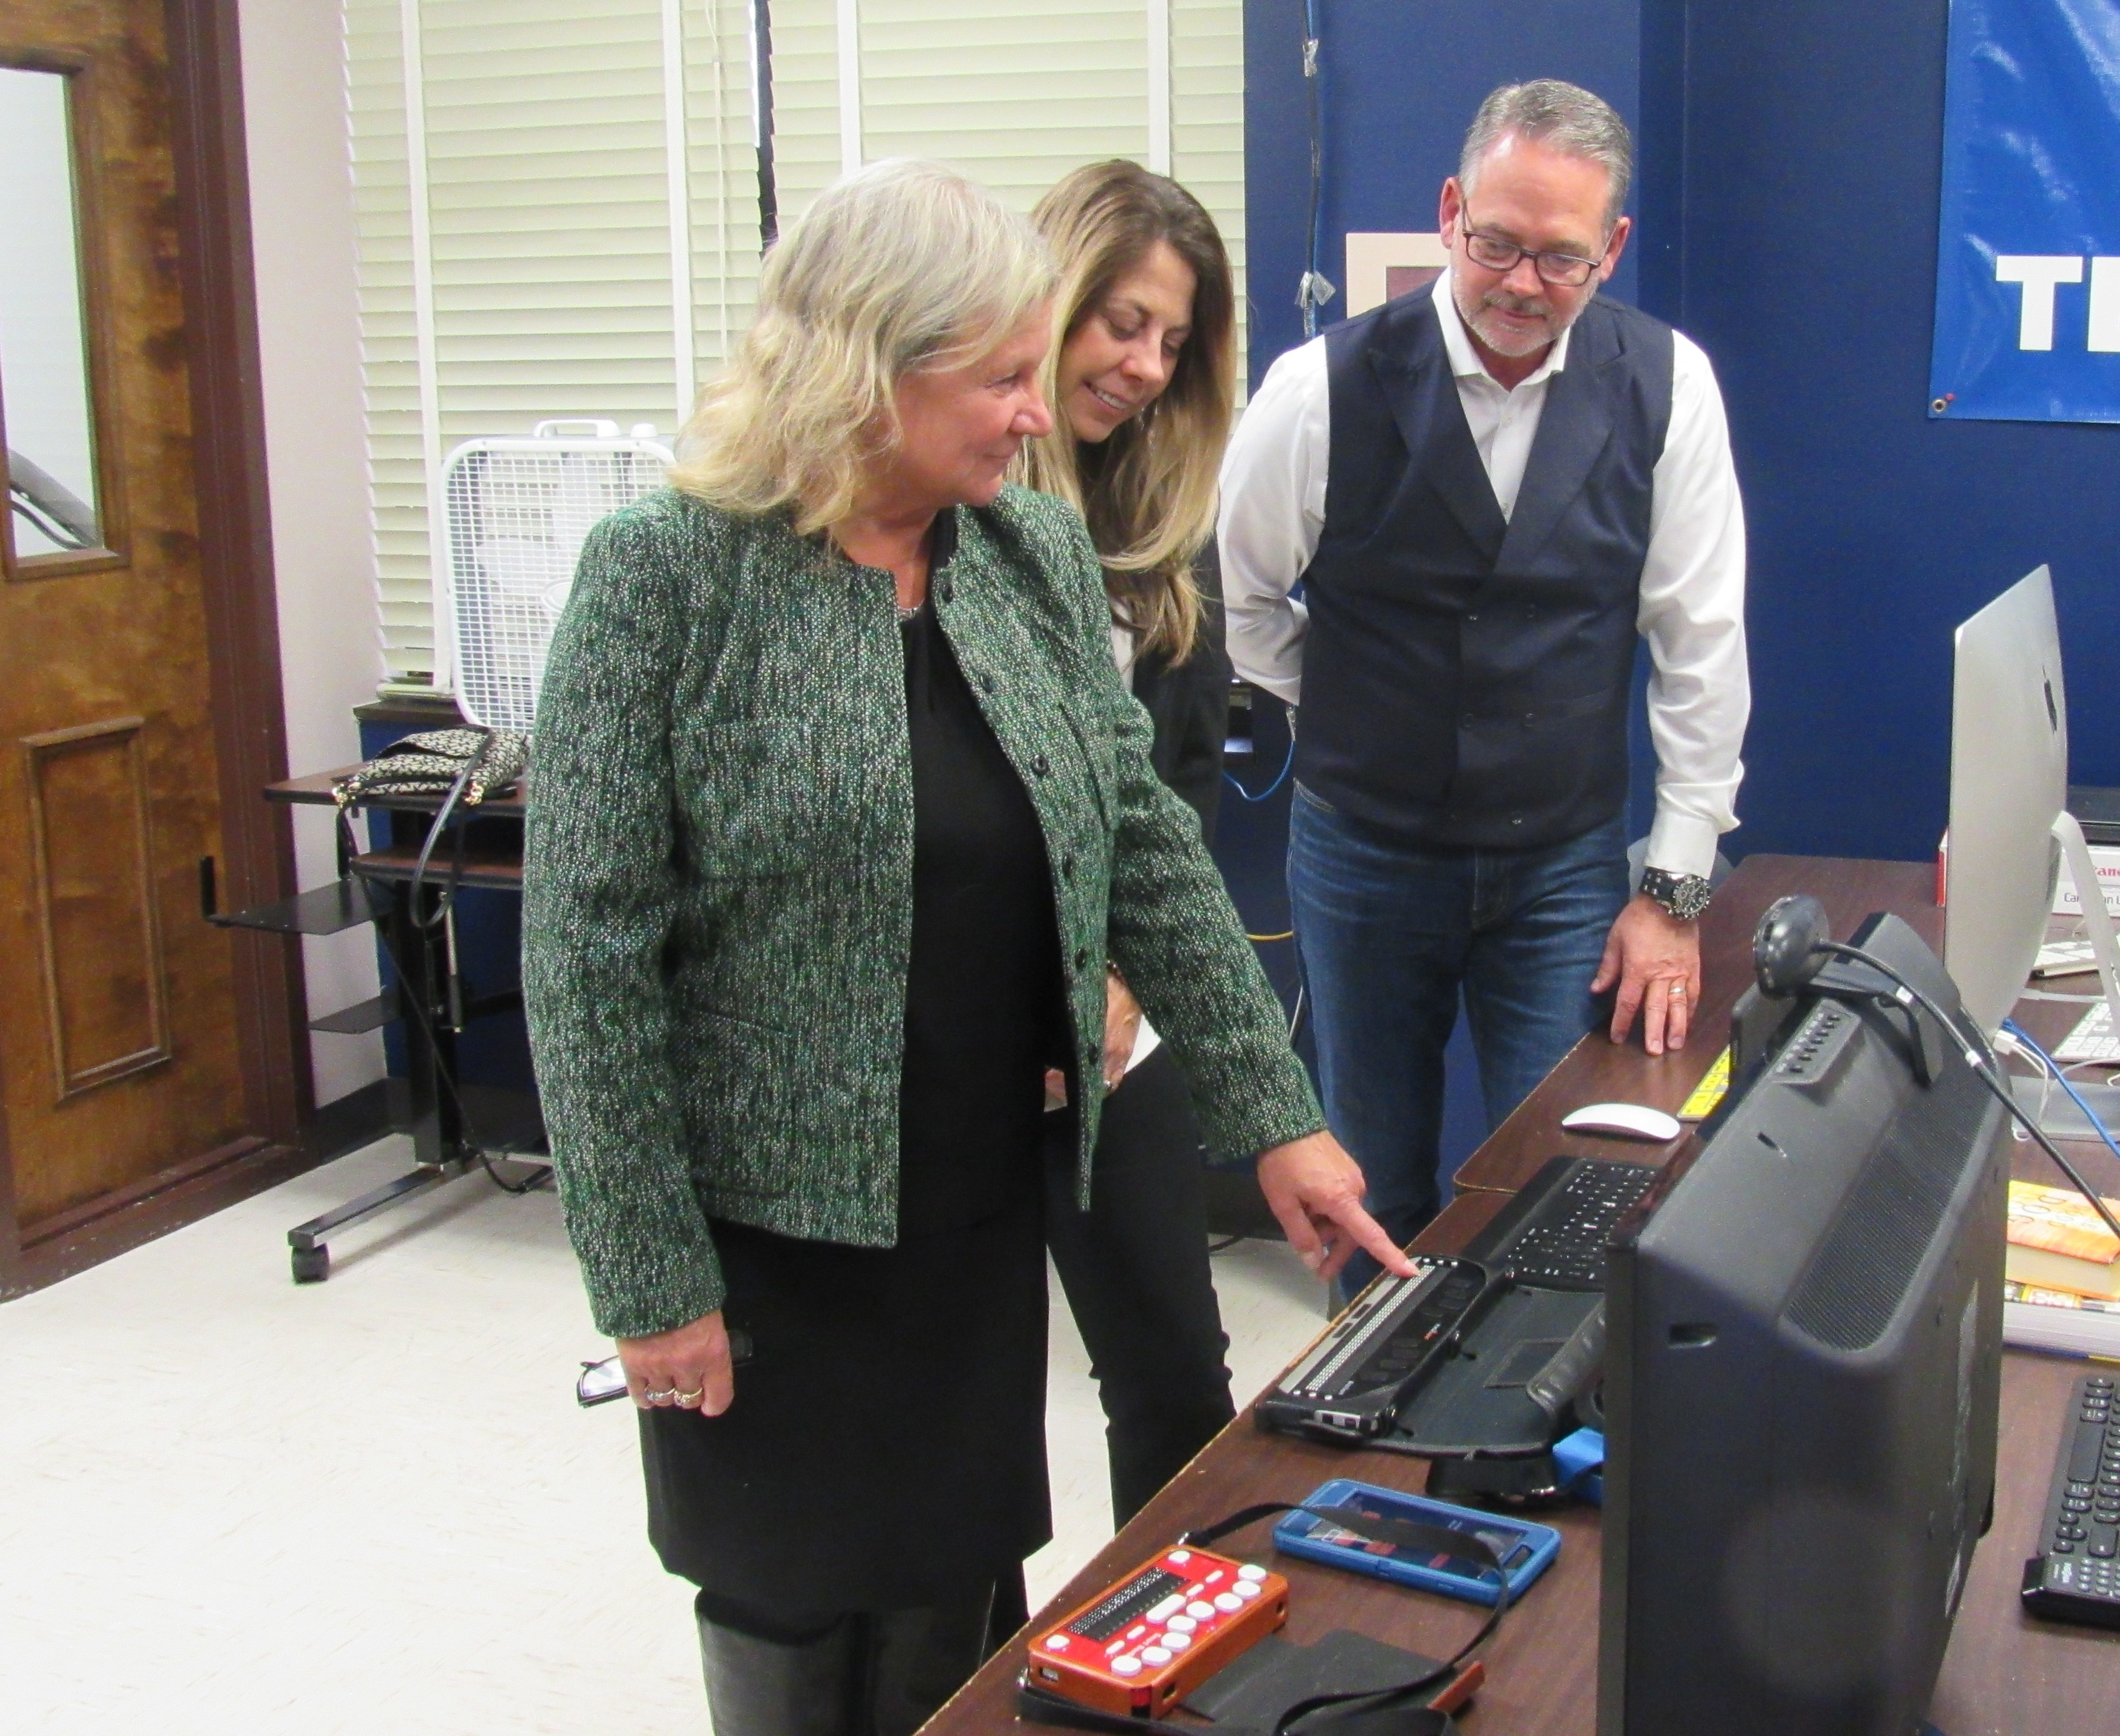 Susan Ruzenski takes Cheryl Anderson and Michael Tease on a tour of their facilities